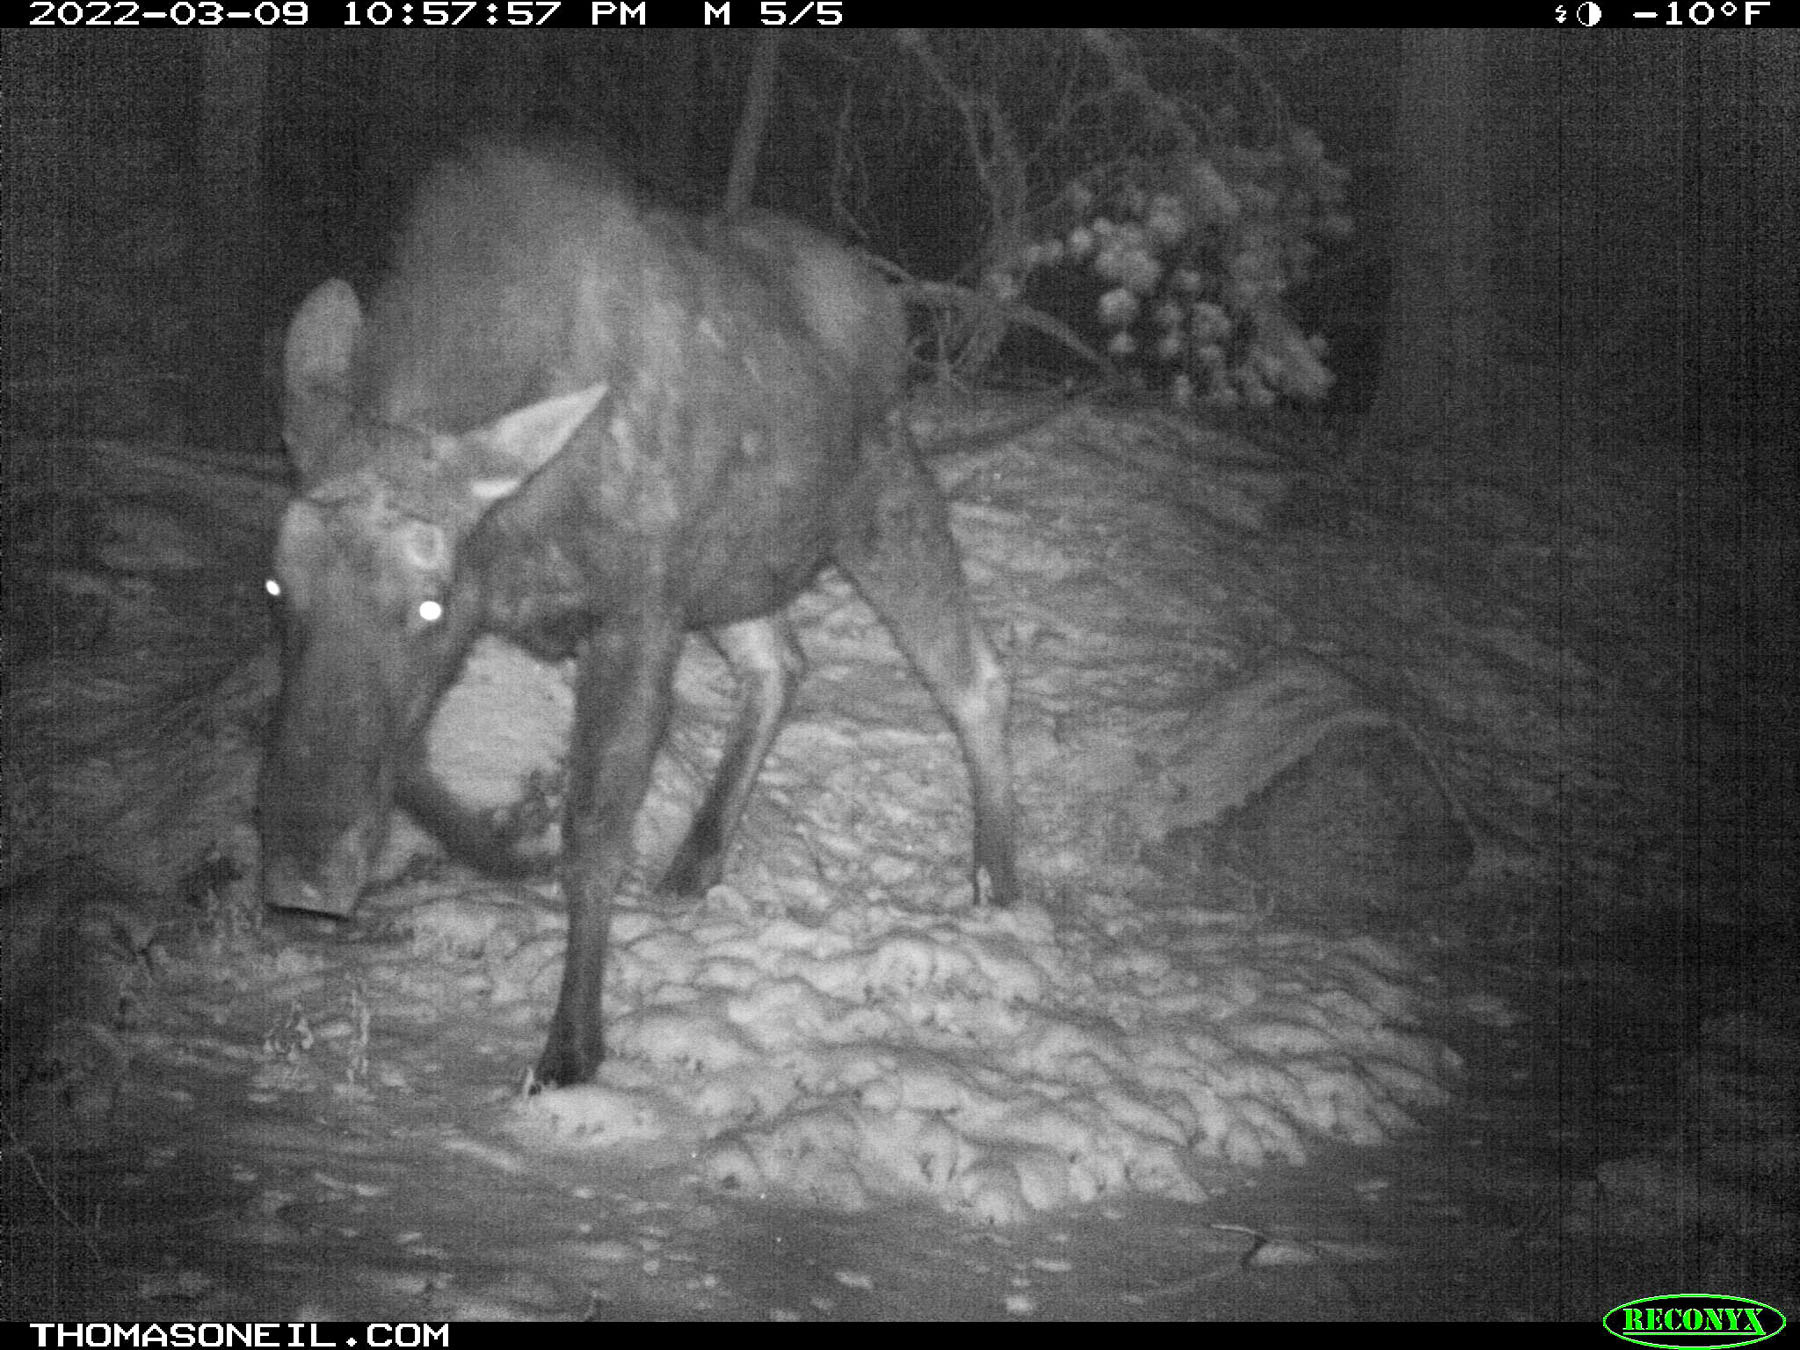 Moose on trailcam, Red Lodge, MT, March 2022.  Click for next photo.